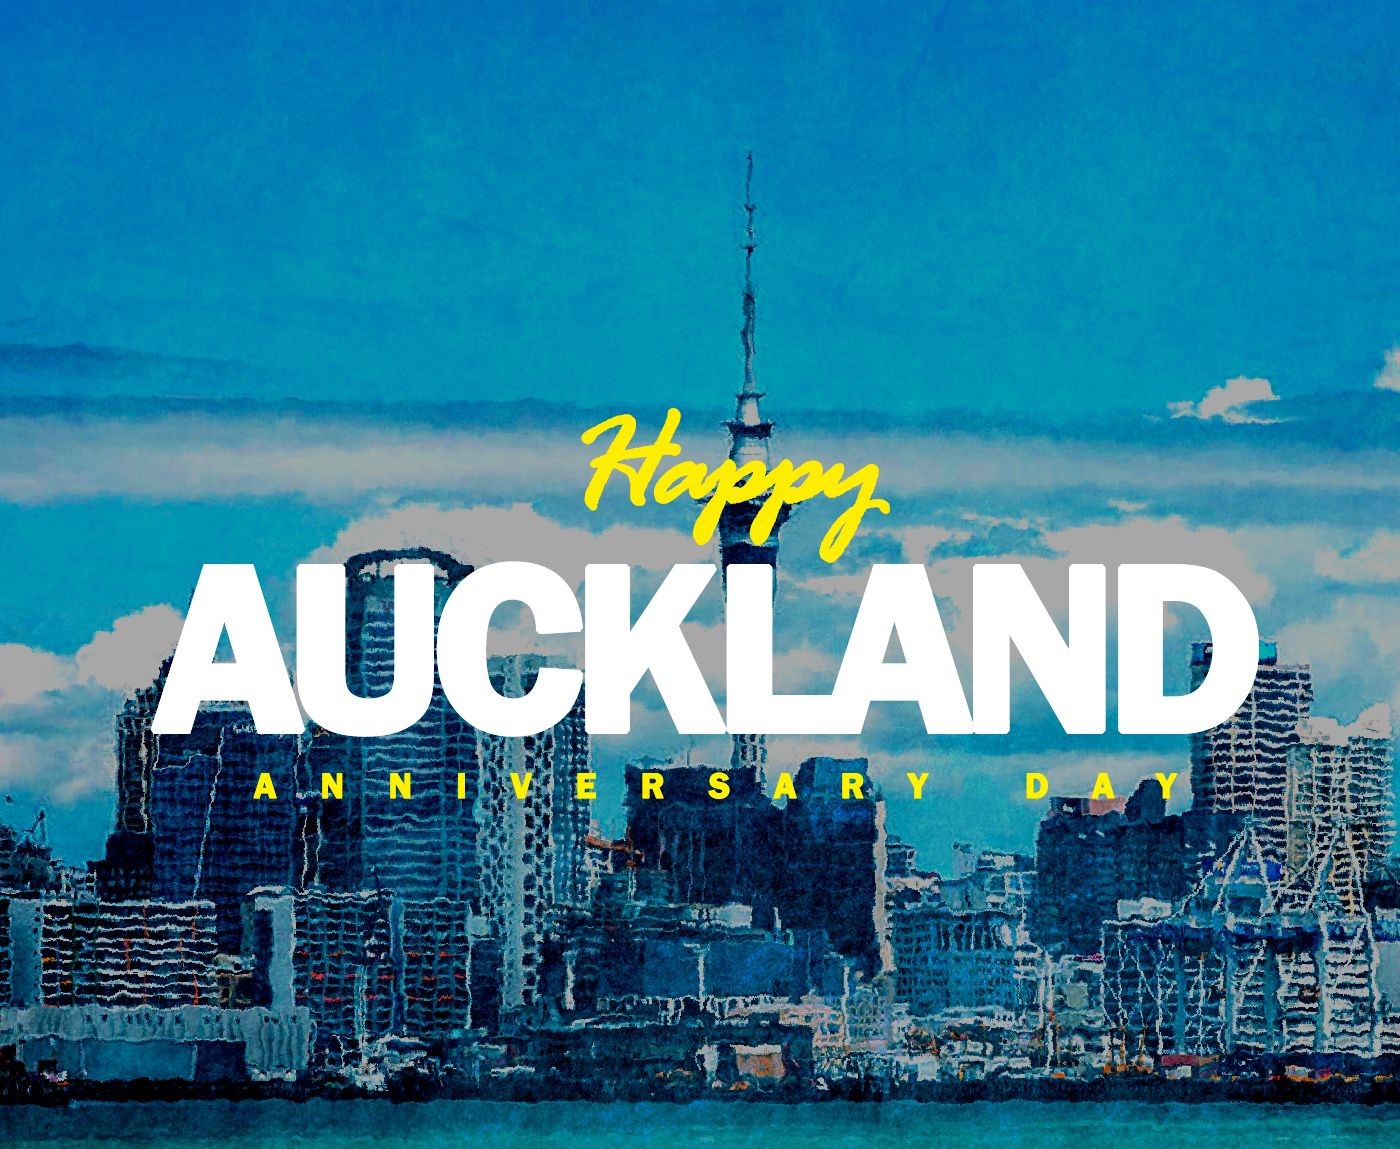 17-facts-about-auckland-anniversary-day